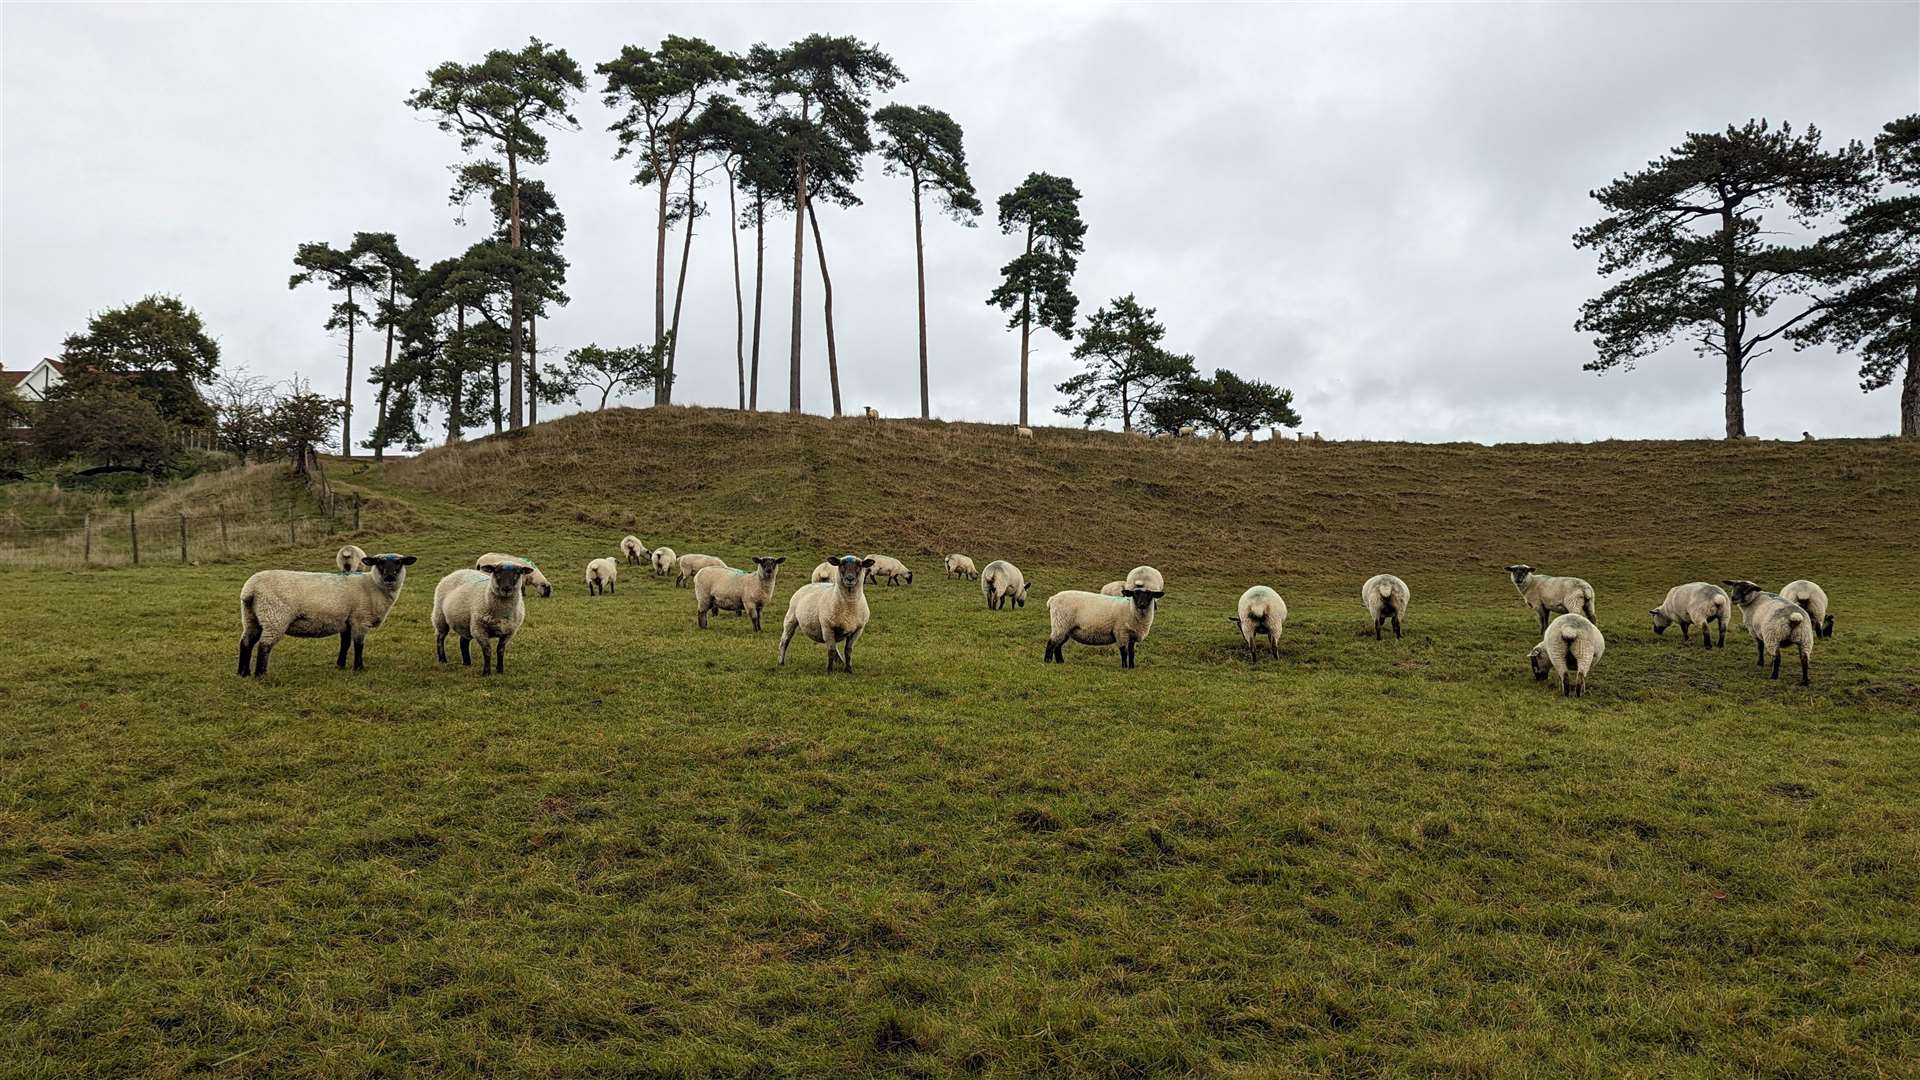 Sheep turn to enquire as to who is traversing their field